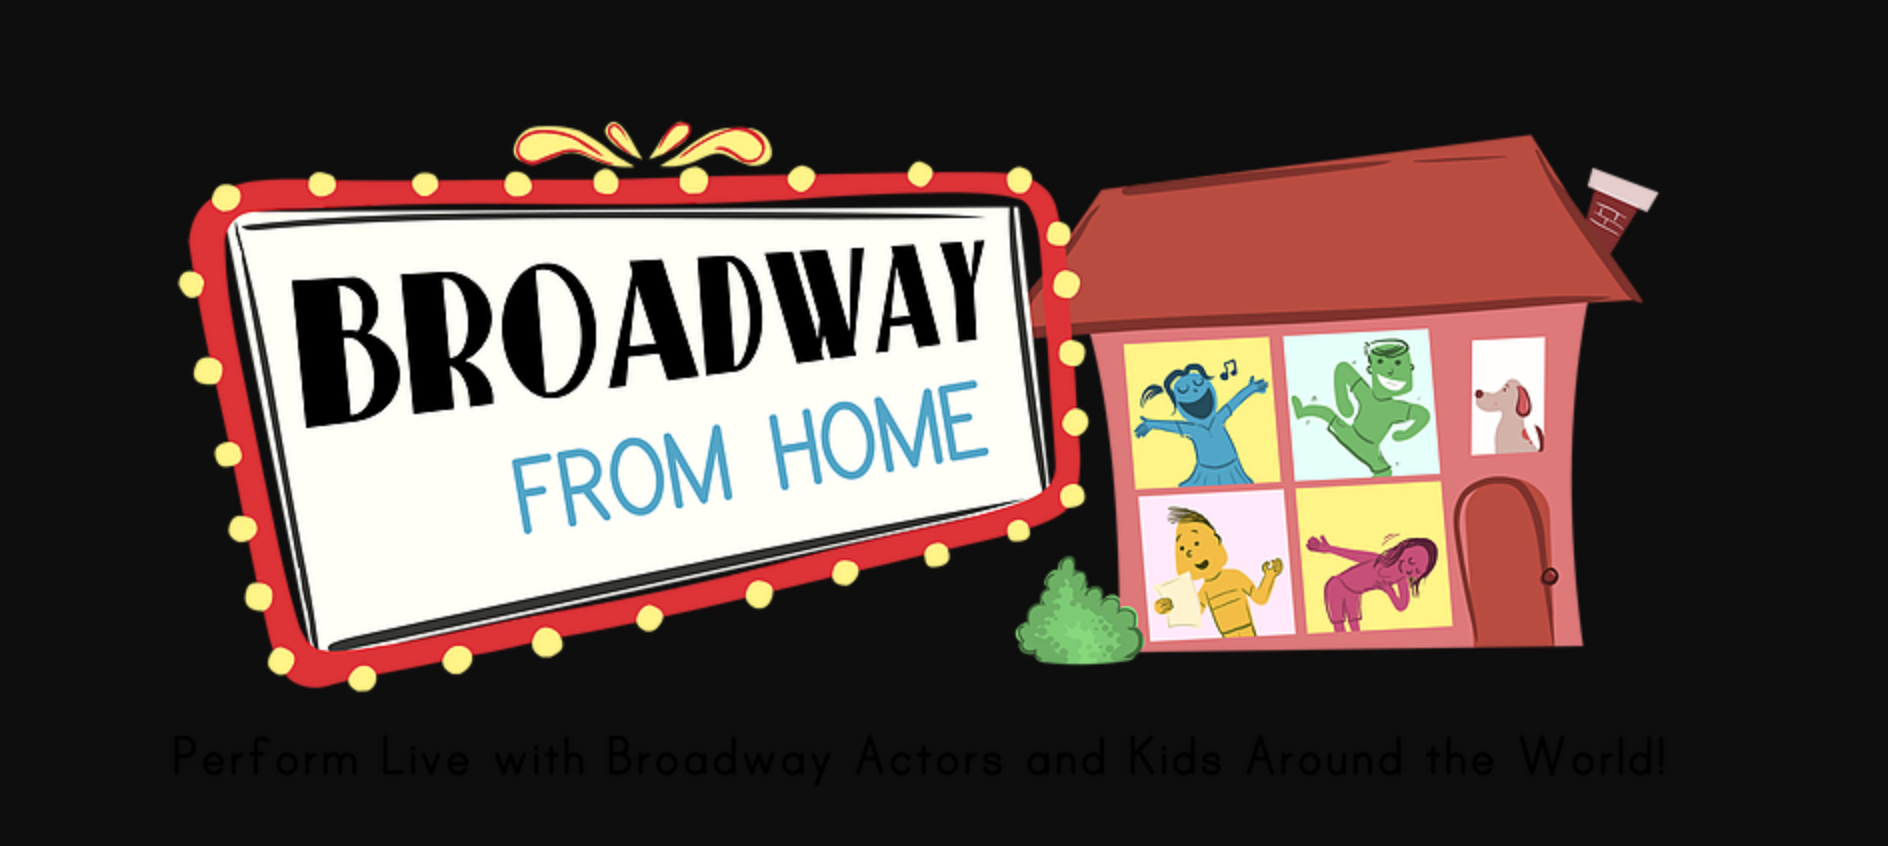 Broadway from Home Virtual Fundraiser